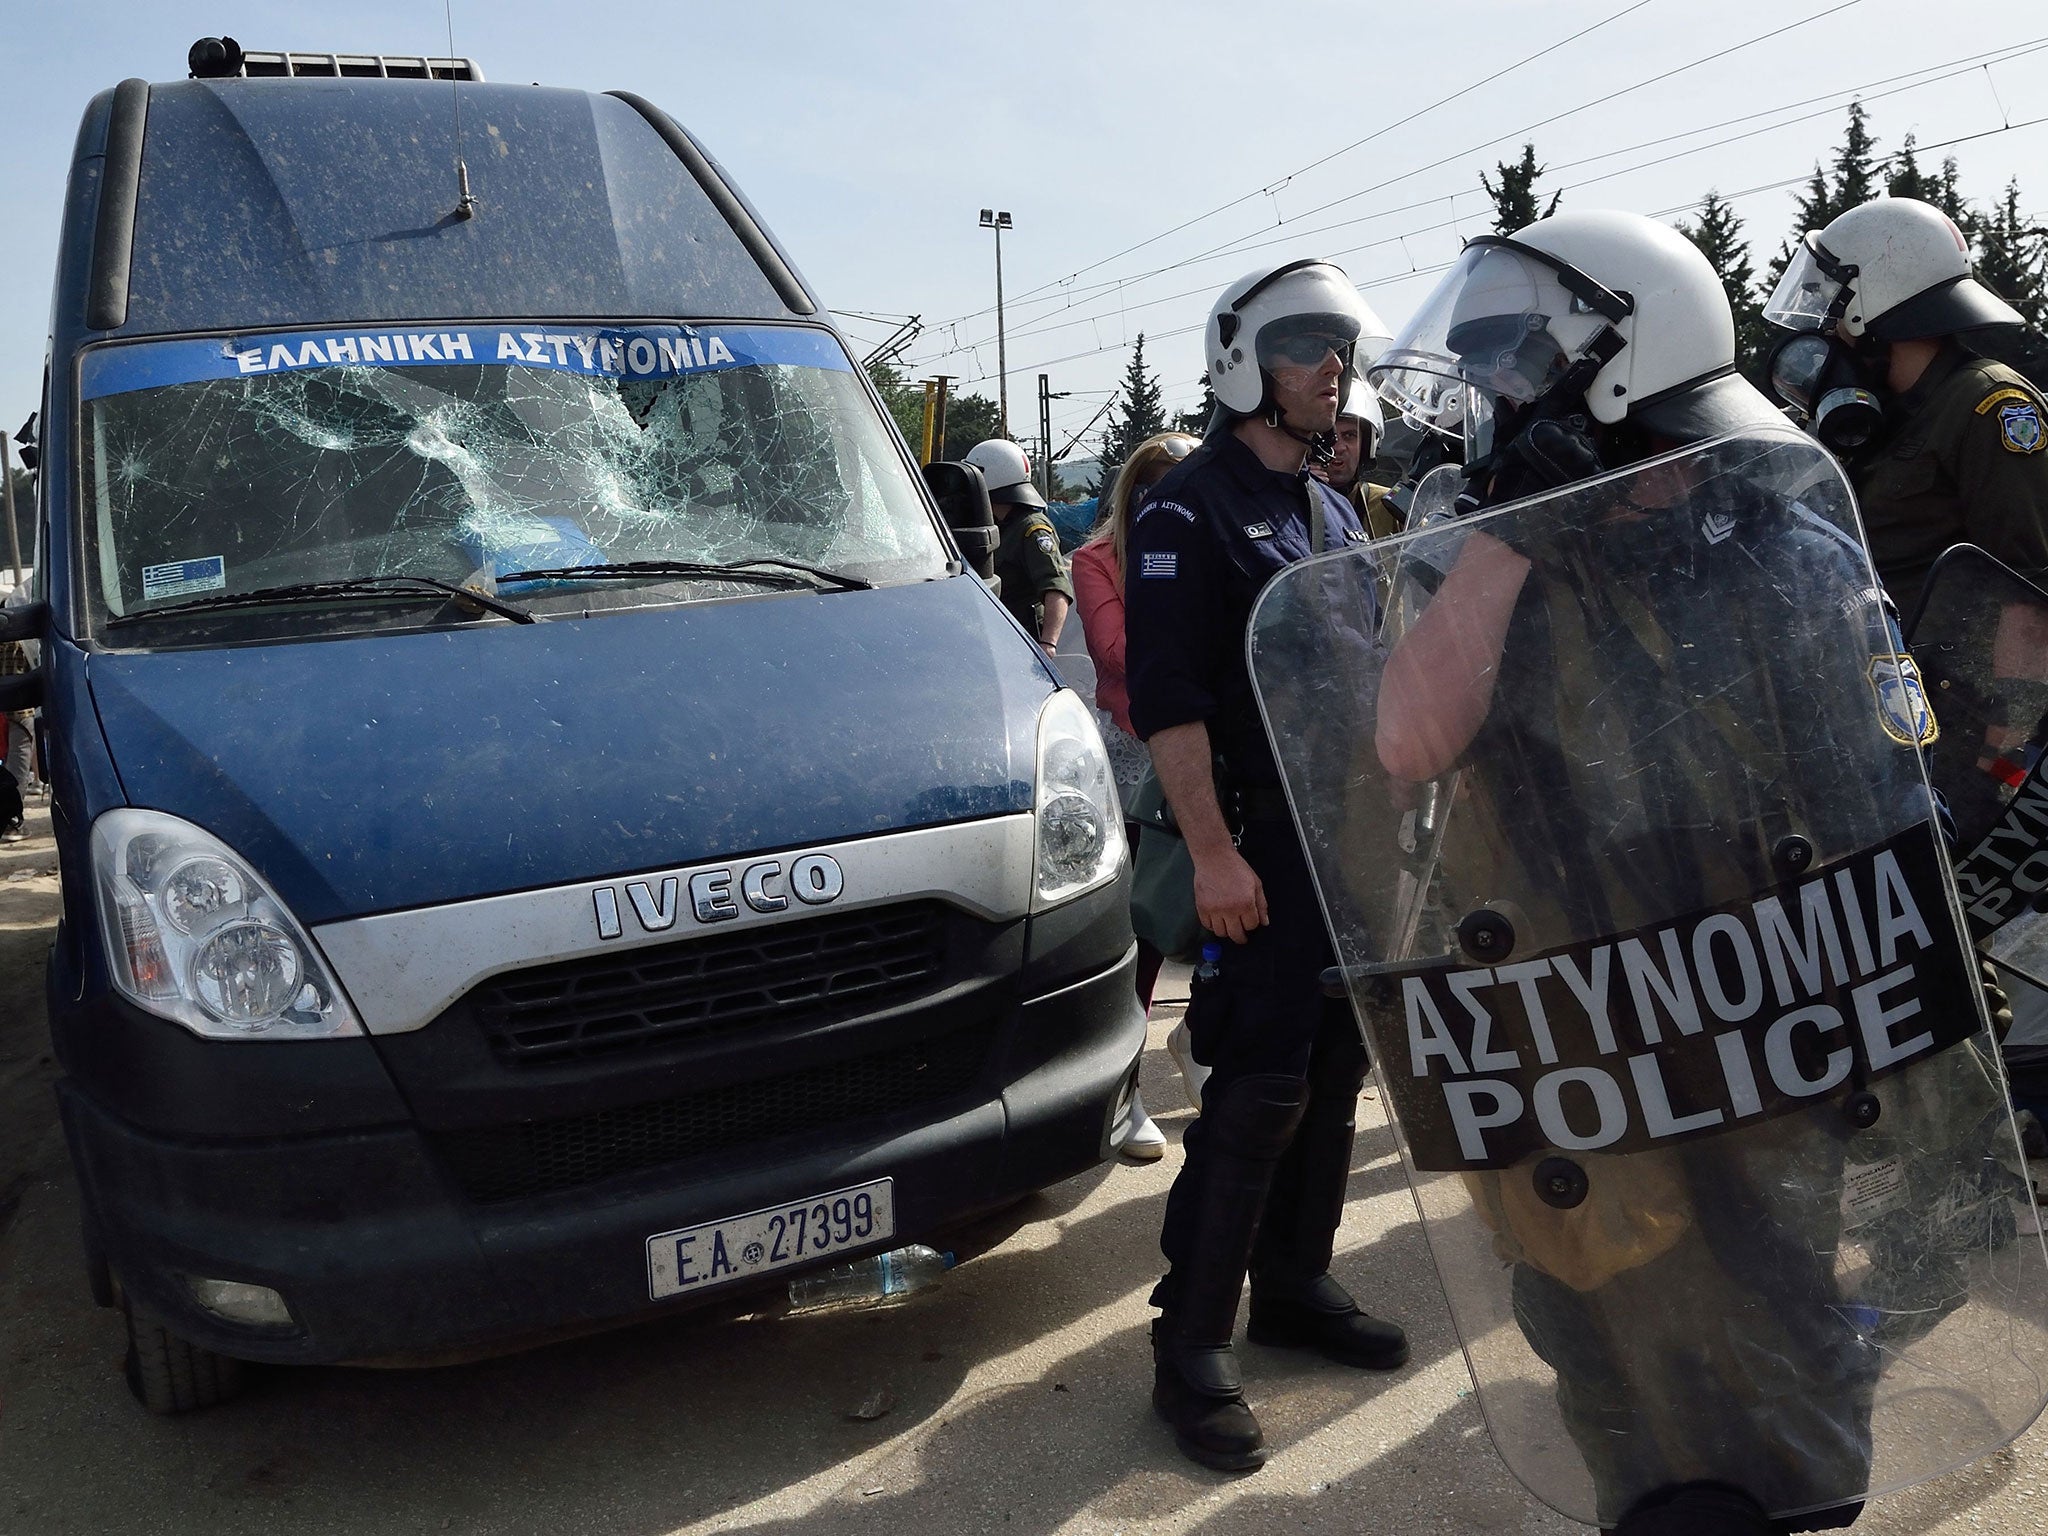 Greek police officers stand guard next to a police van that was involved in an accident that seriously injured a refugee at the Idomeni refugee camp on April 18, 2016.